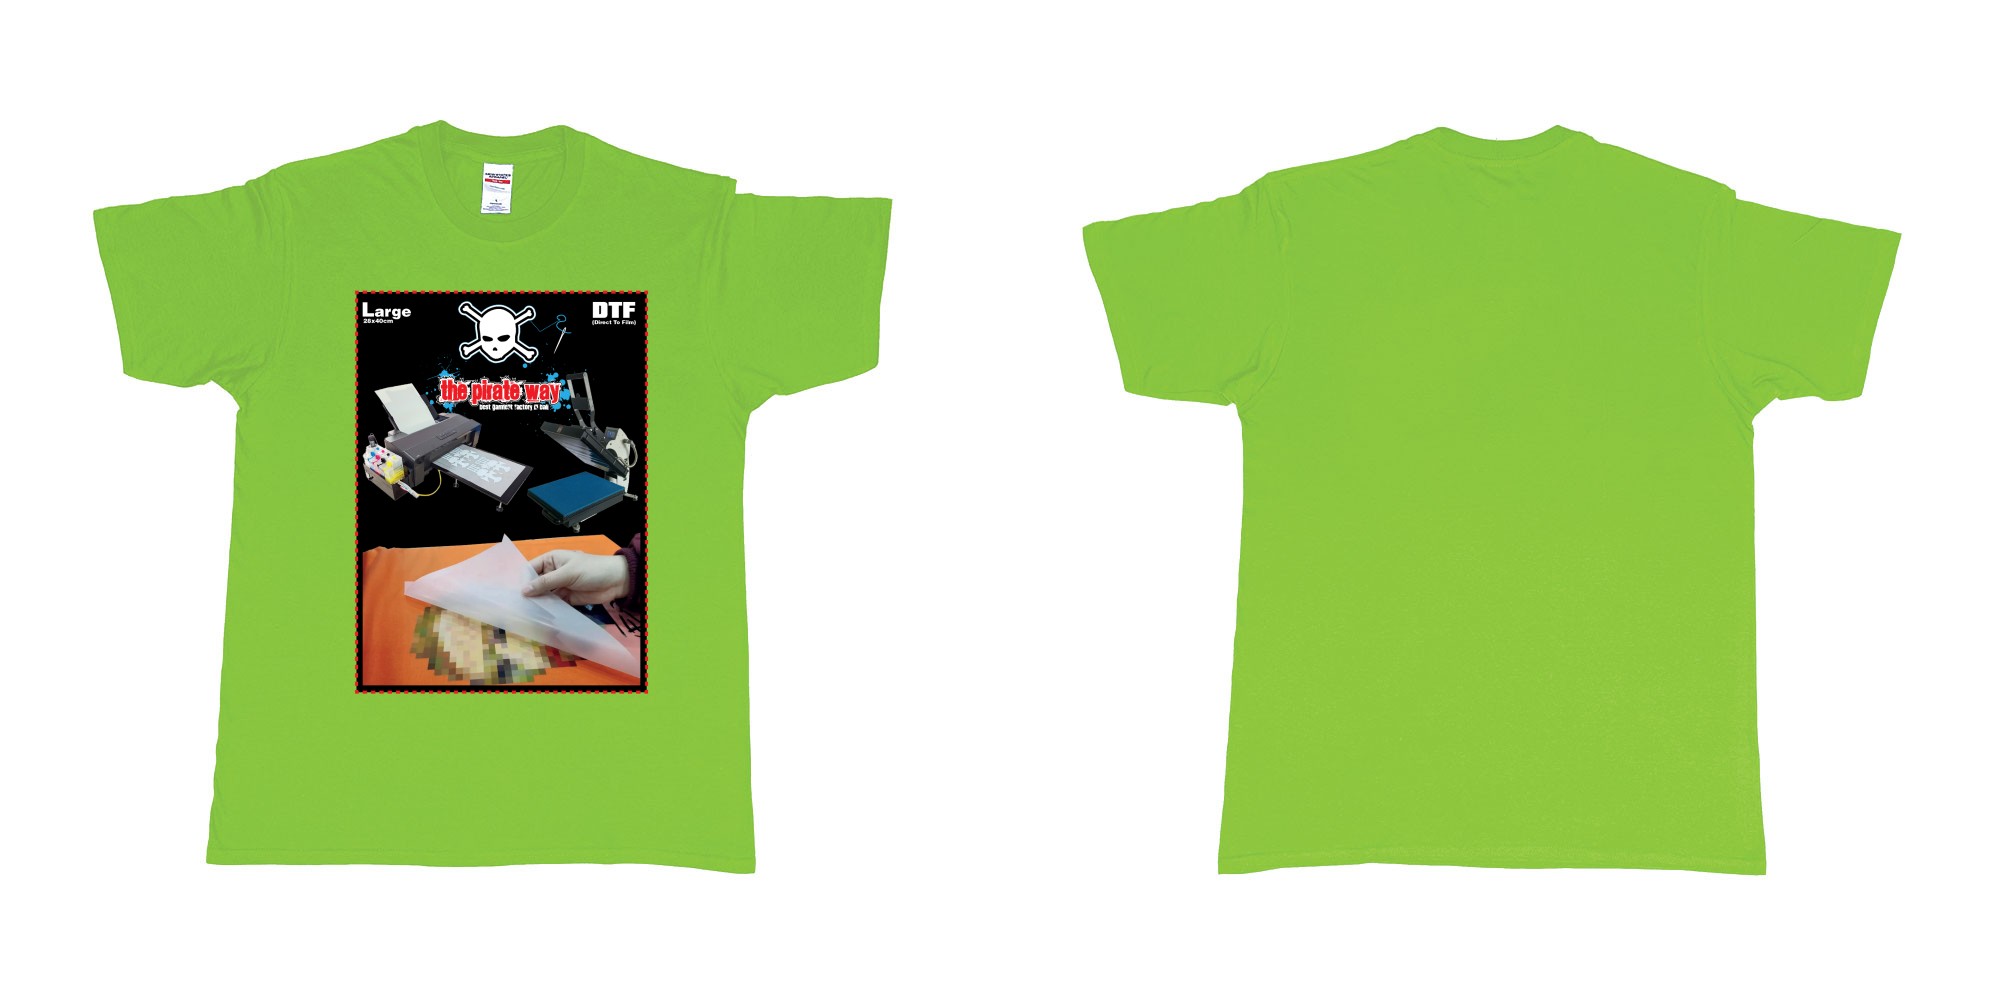 Custom tshirt design dtf printing tshirt large 28x40cm in fabric color lime choice your own text made in Bali by The Pirate Way